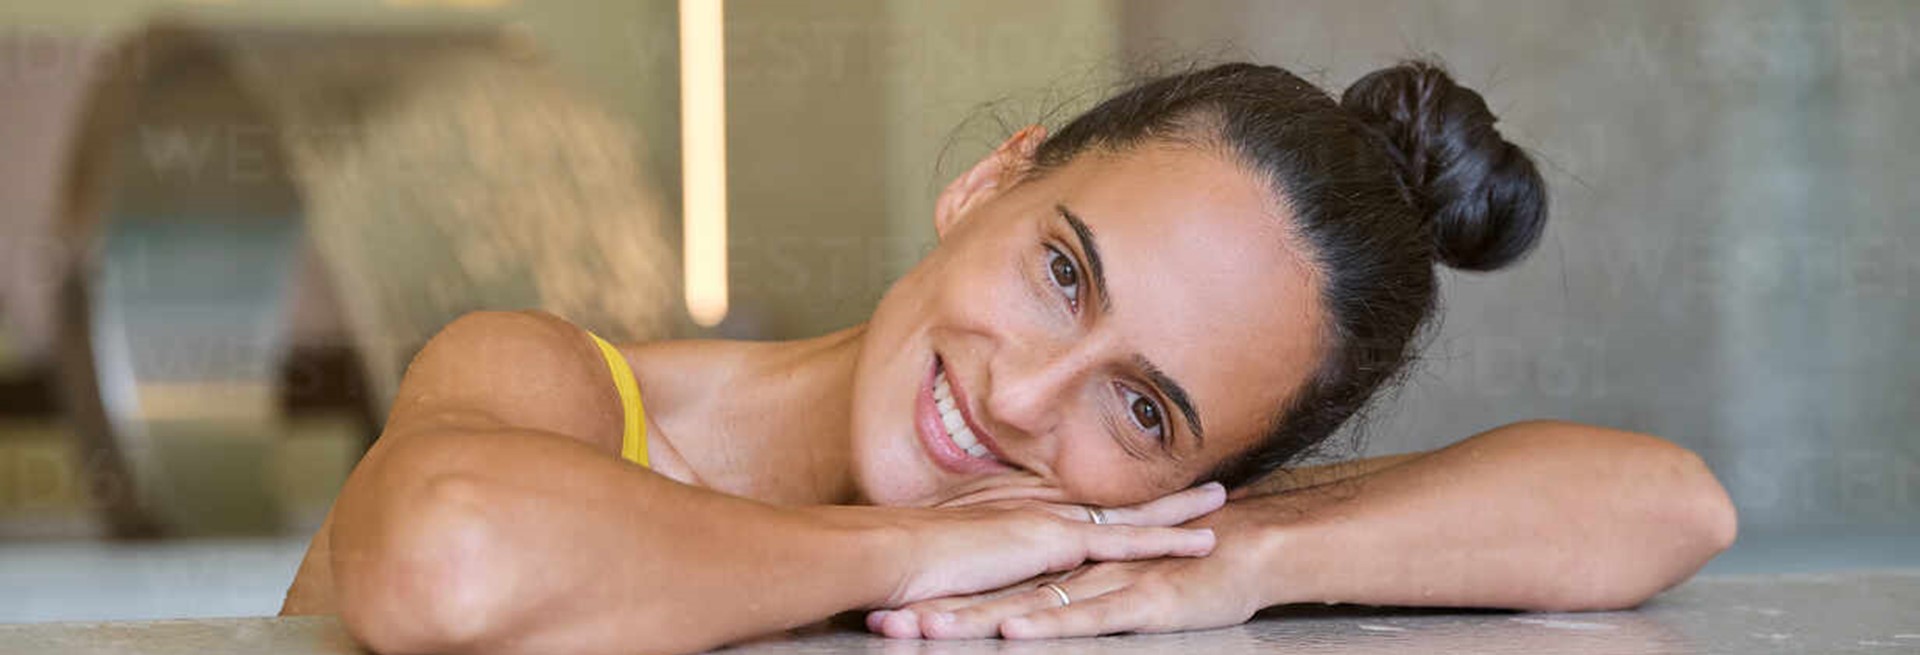 Happy Young Female Looking At Camera And Smiling While Relaxing During Spa Session With Hydro Massage In Modern Wellness Center ADSF16744